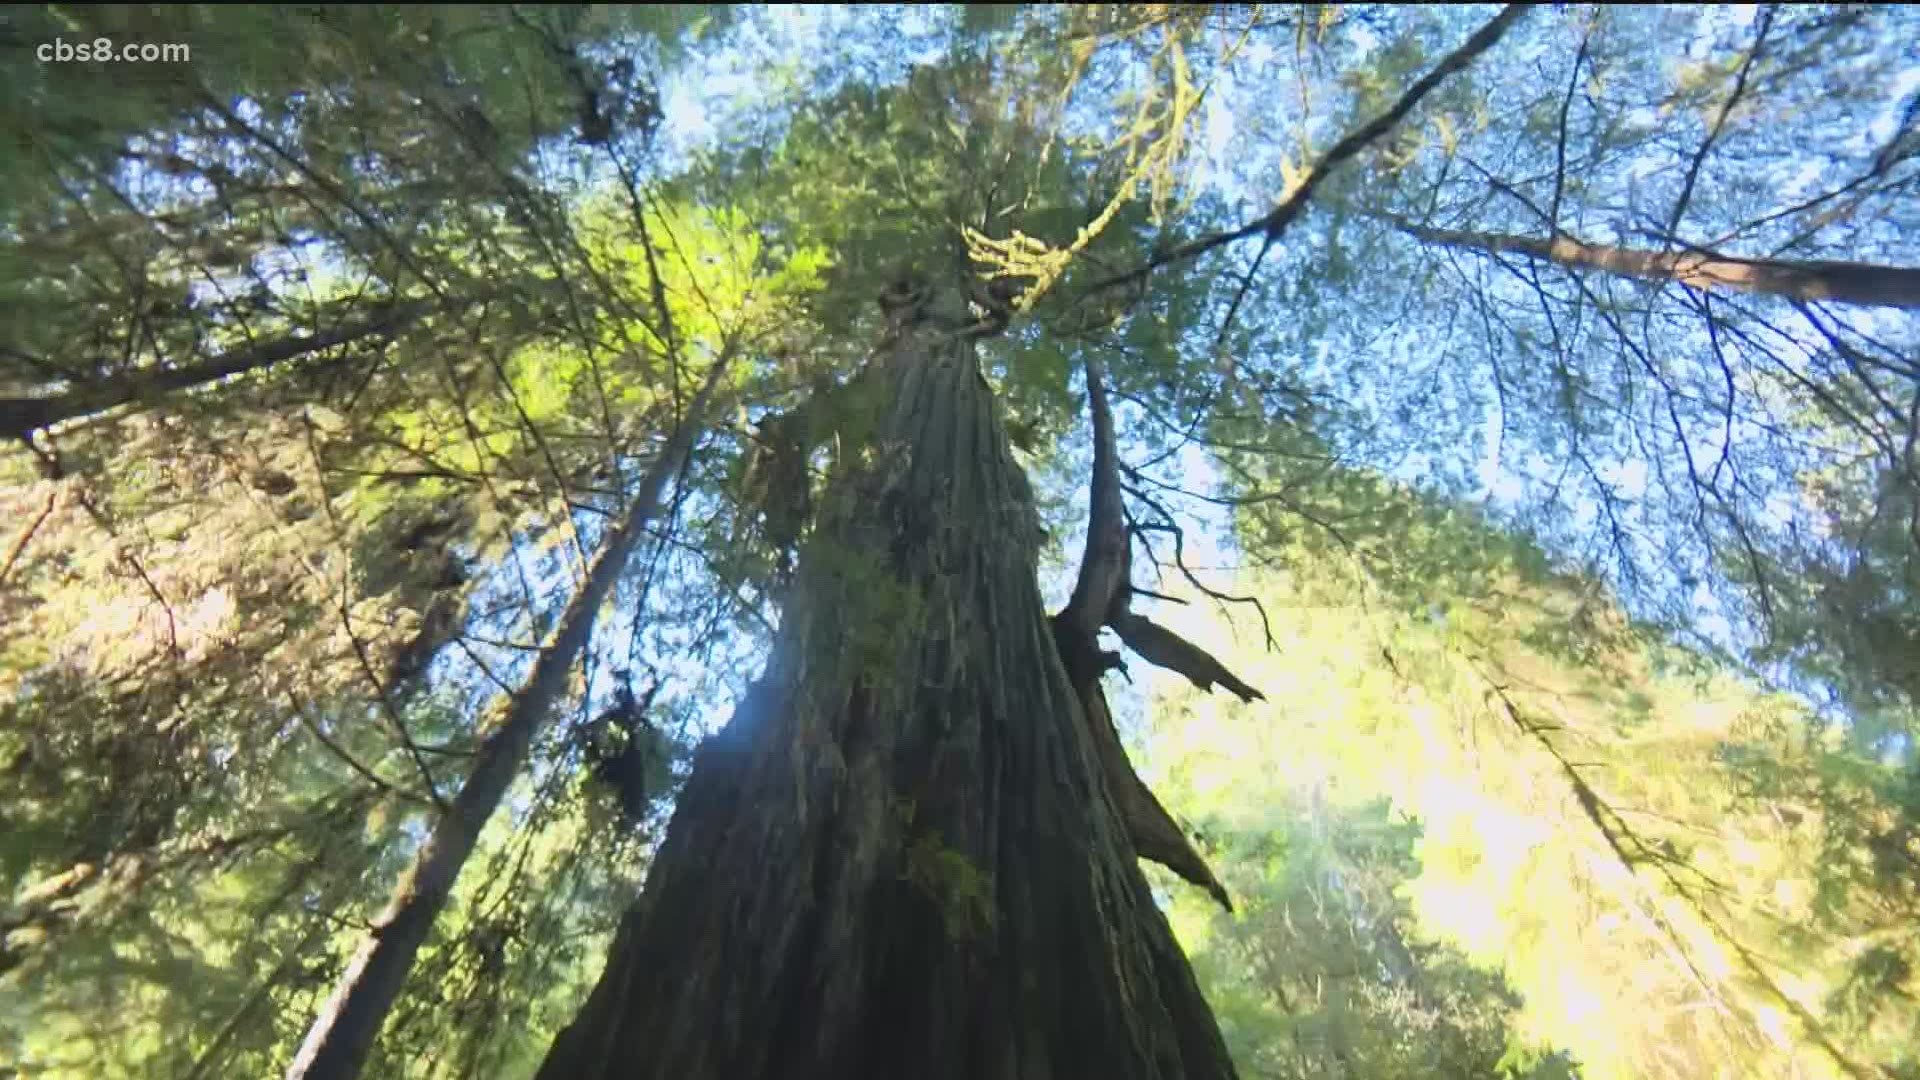 Fewer than 120,000 acres of the original redwood forest still stands after the effects of commercial logging have wiped out this California staple.